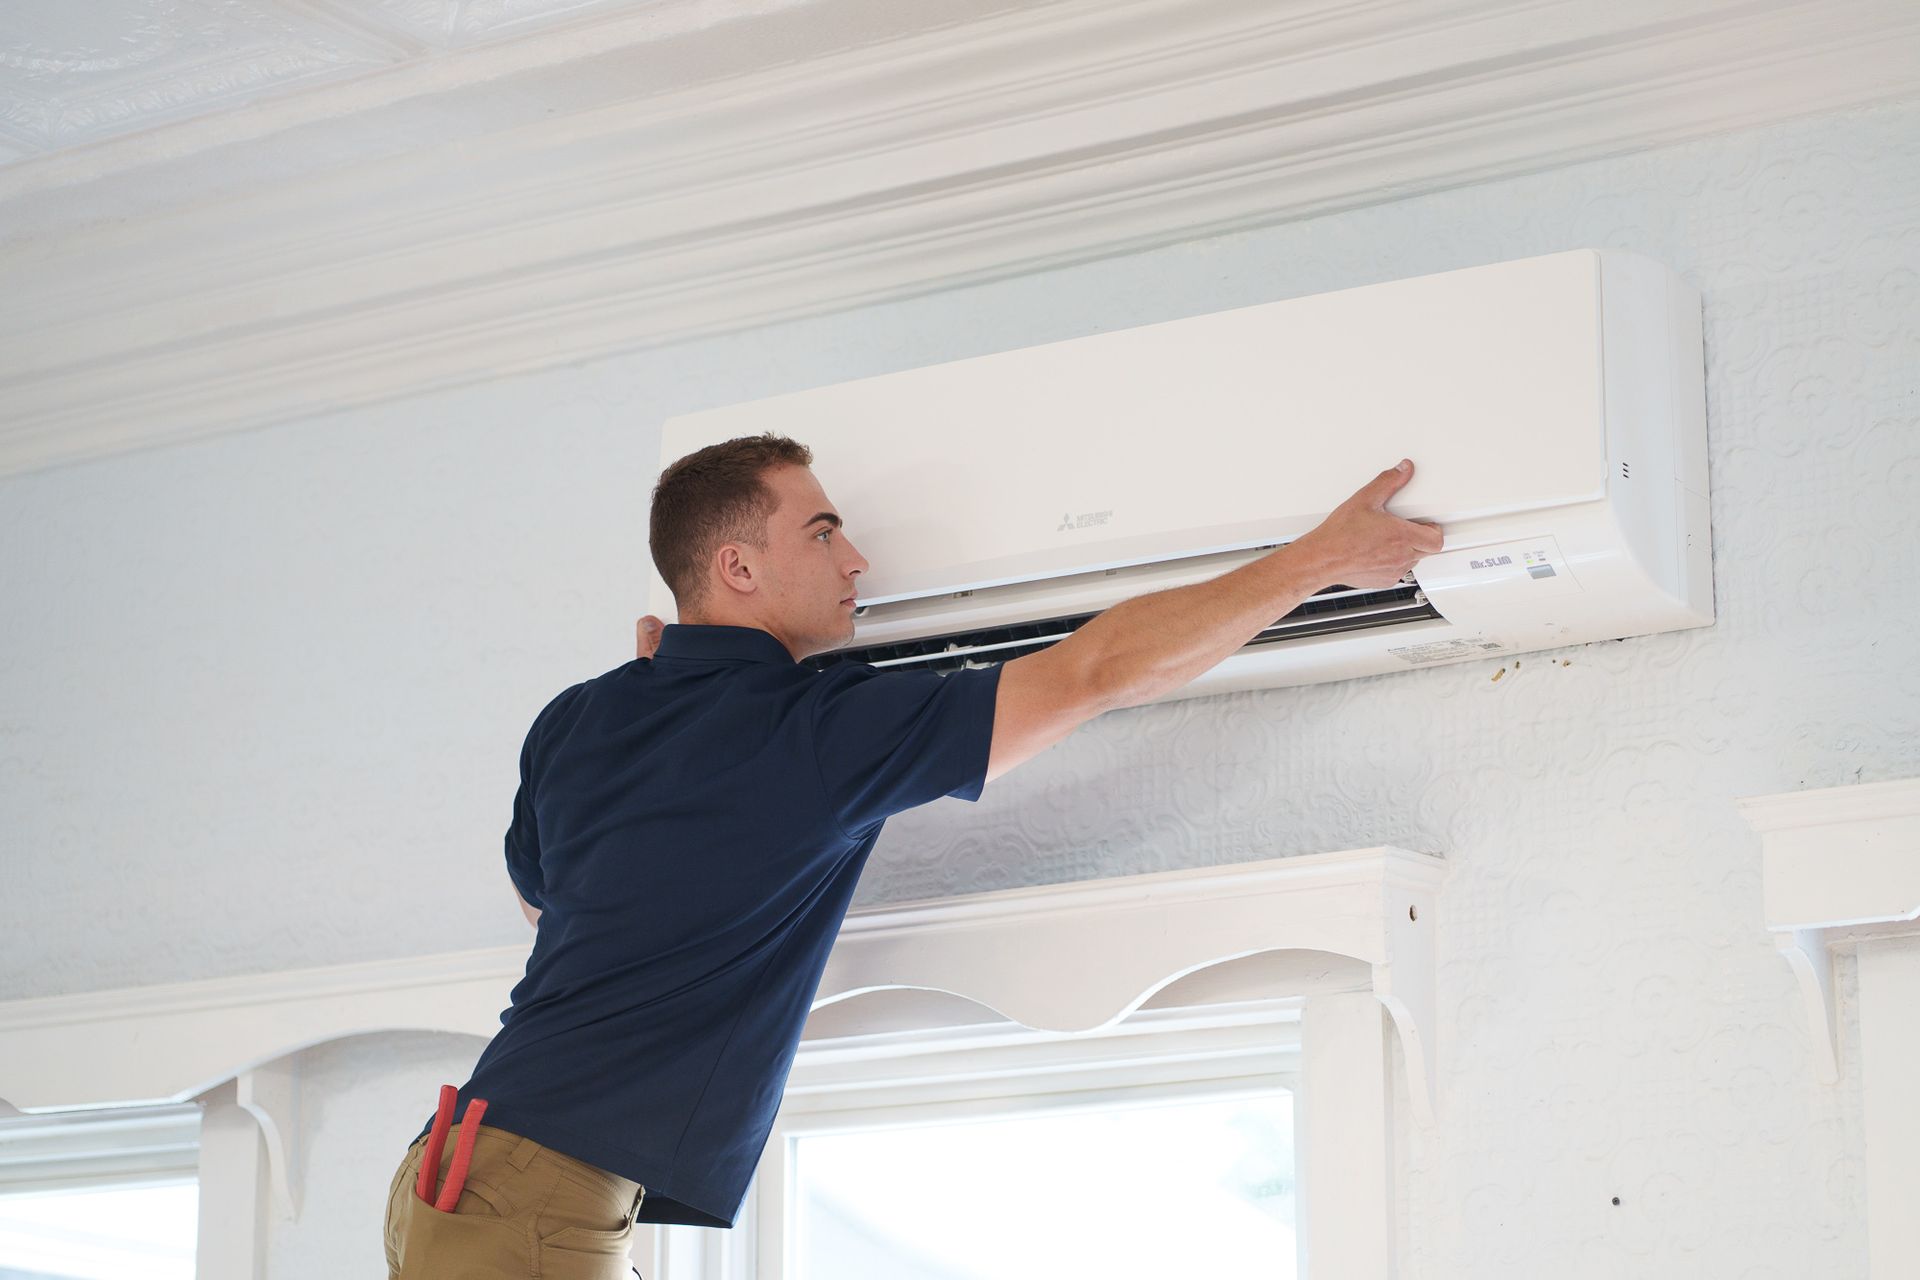 Prevett Heating and Cooling |A man is installing an air conditioner on the wall.